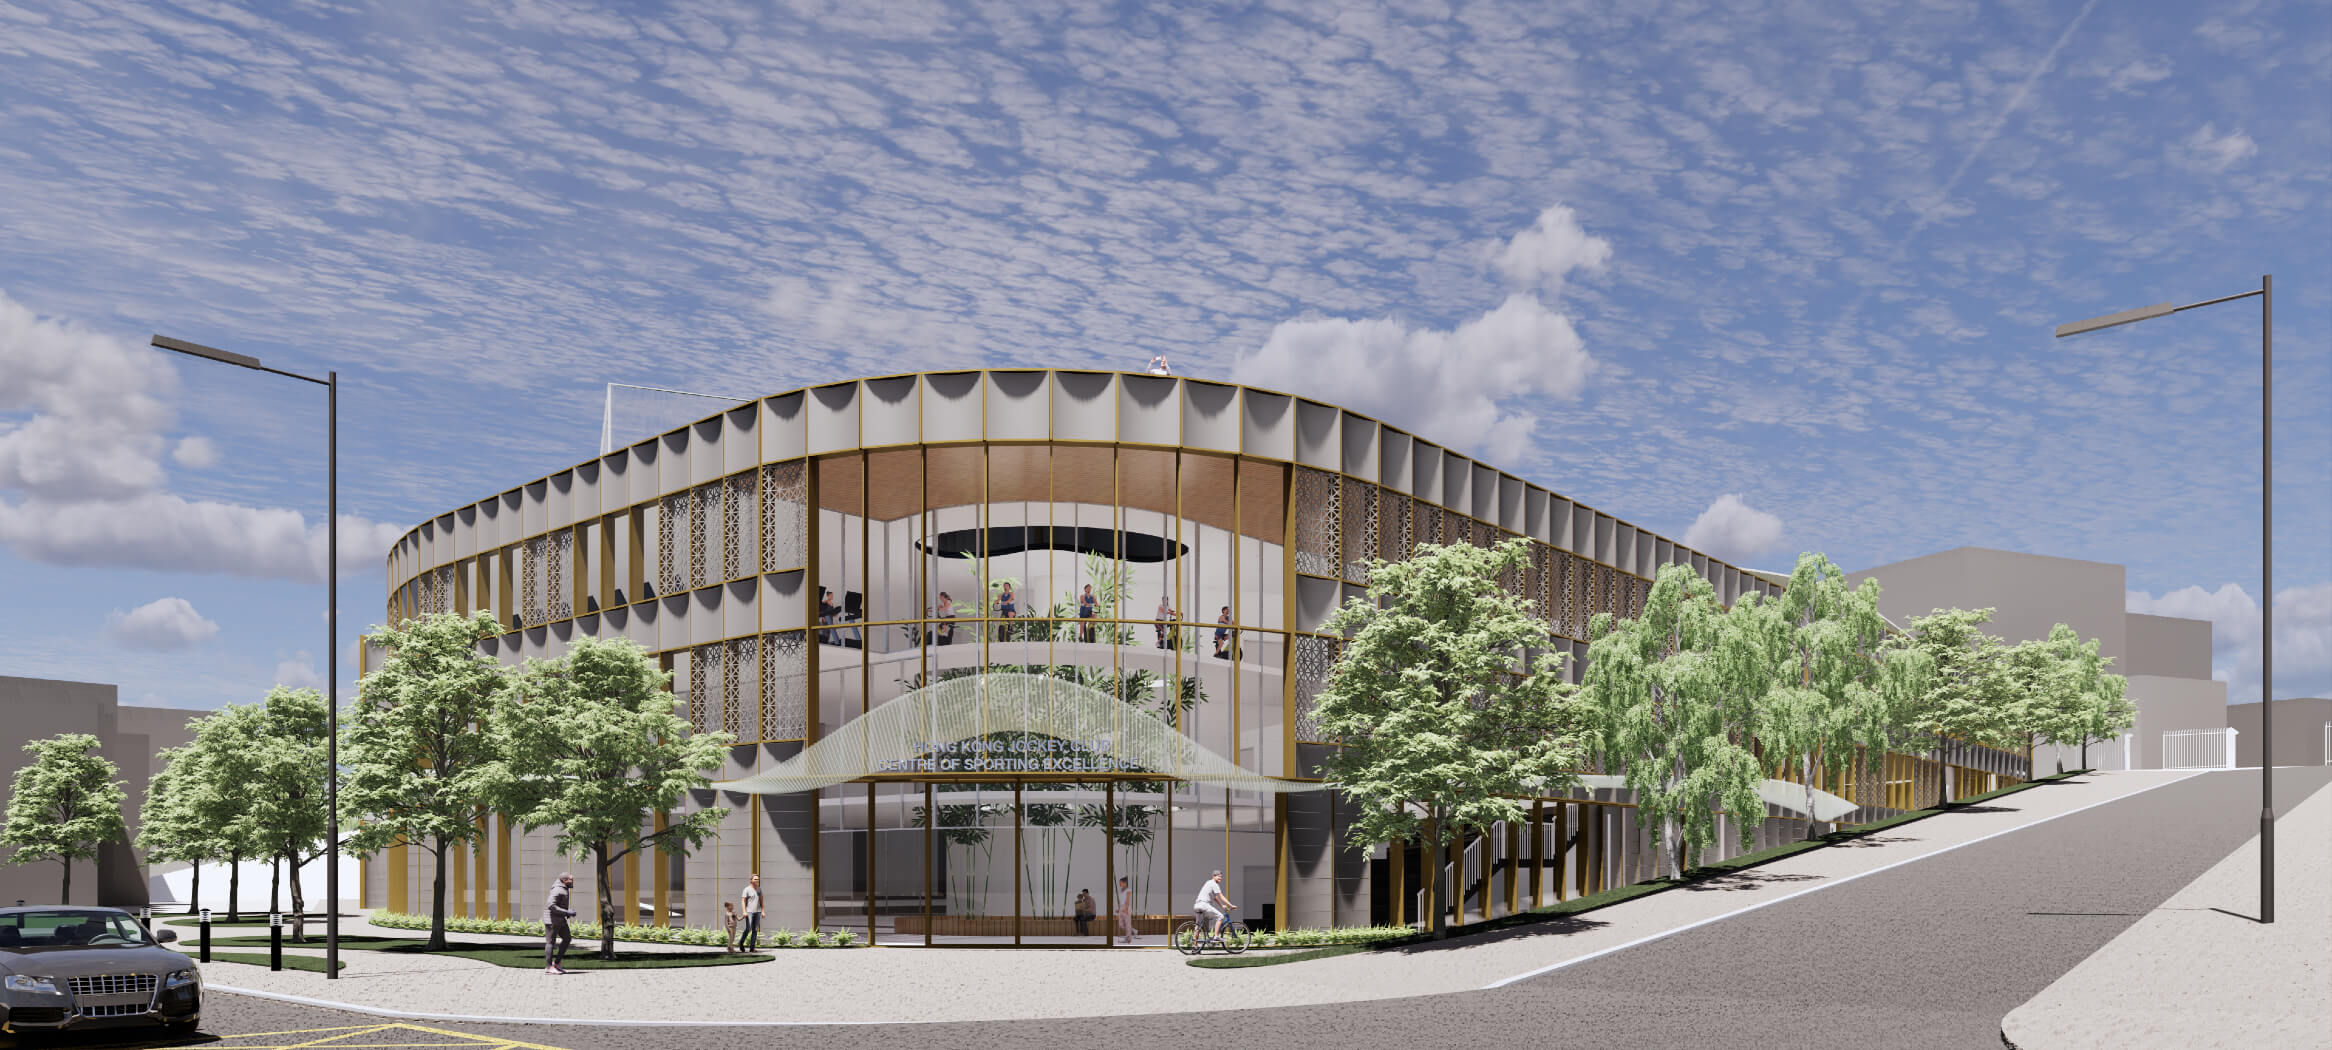 CGI of glass exterior entrance view of ESF sporting facility. Showing trees wrapping around the building and open roads.